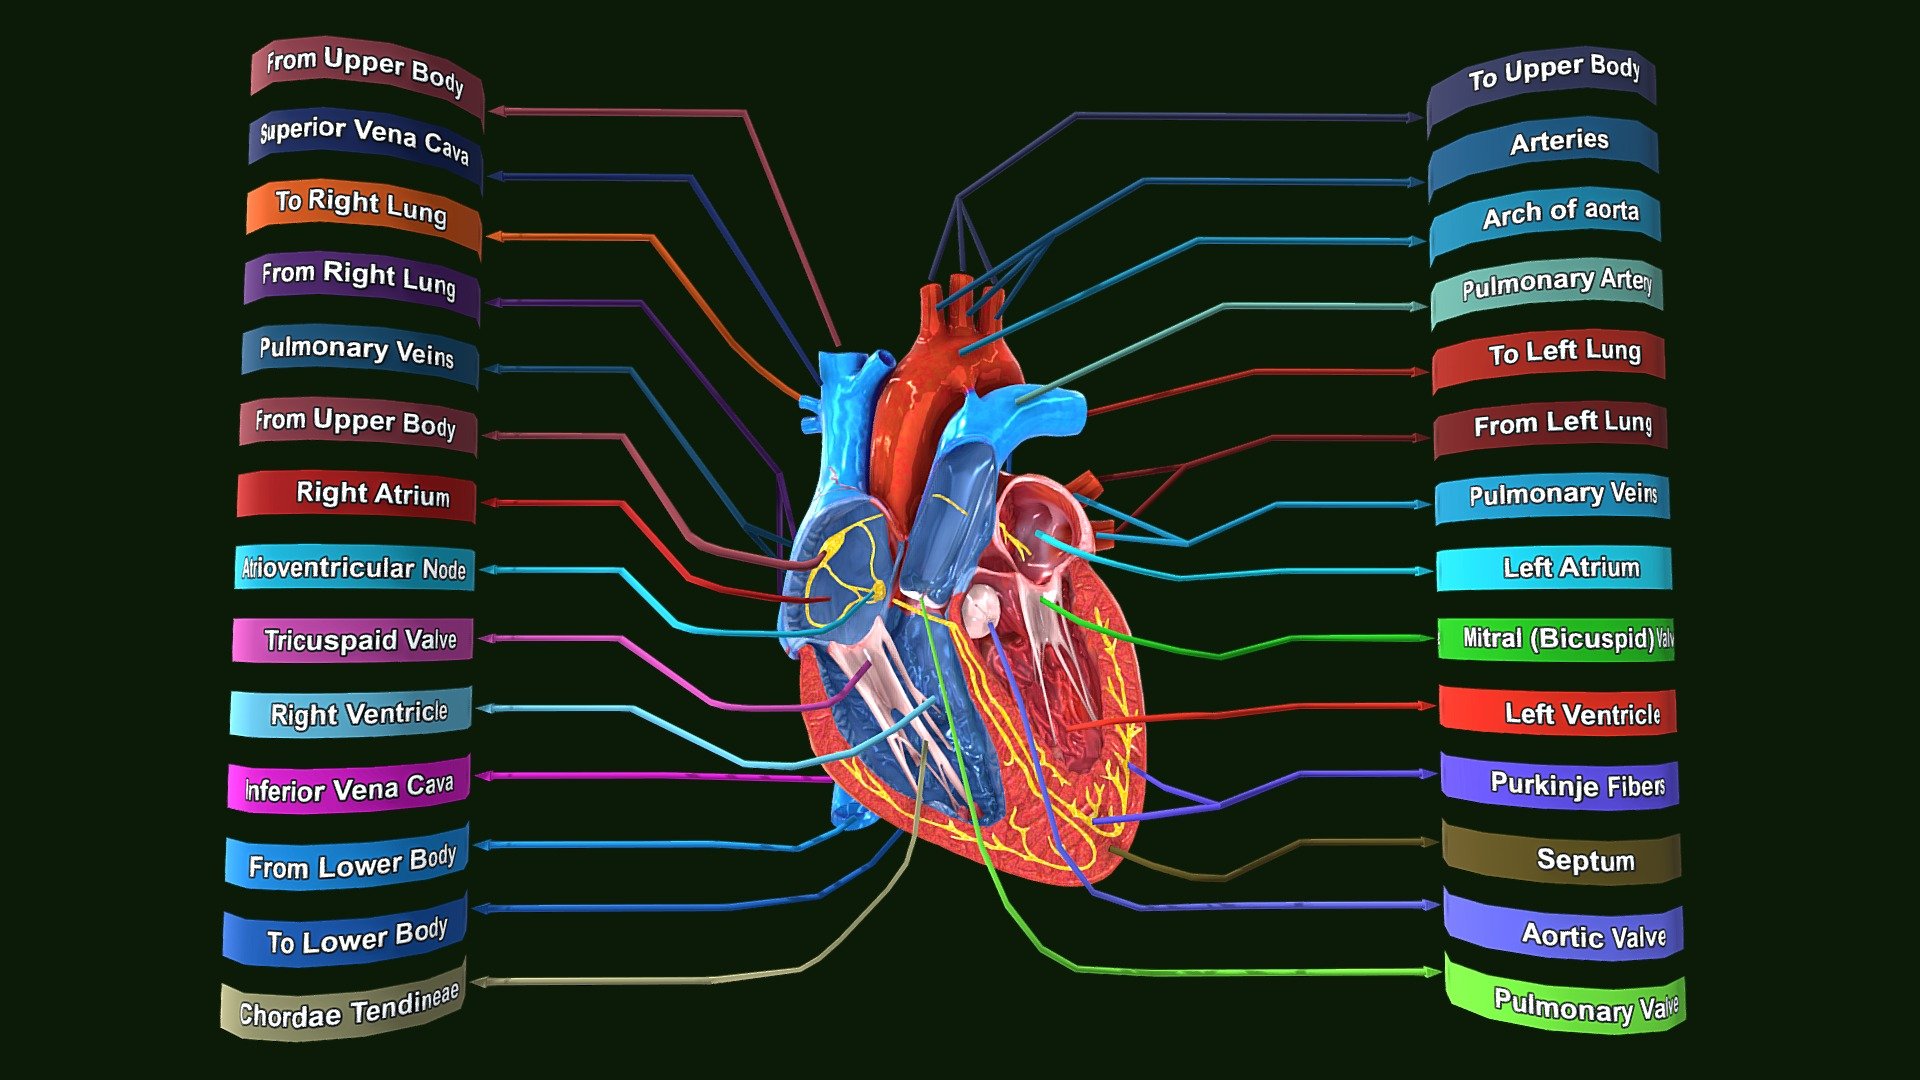 Human Heart Anatomy Labeled
Human Heart Anatomy Labeled 3d model for students to Learn anatomy.


Human #Heart #Anatomy #Labeled #3d model - Human Heart Anatomy Labeled - Buy Royalty Free 3D model by srikanthsamba 3d model